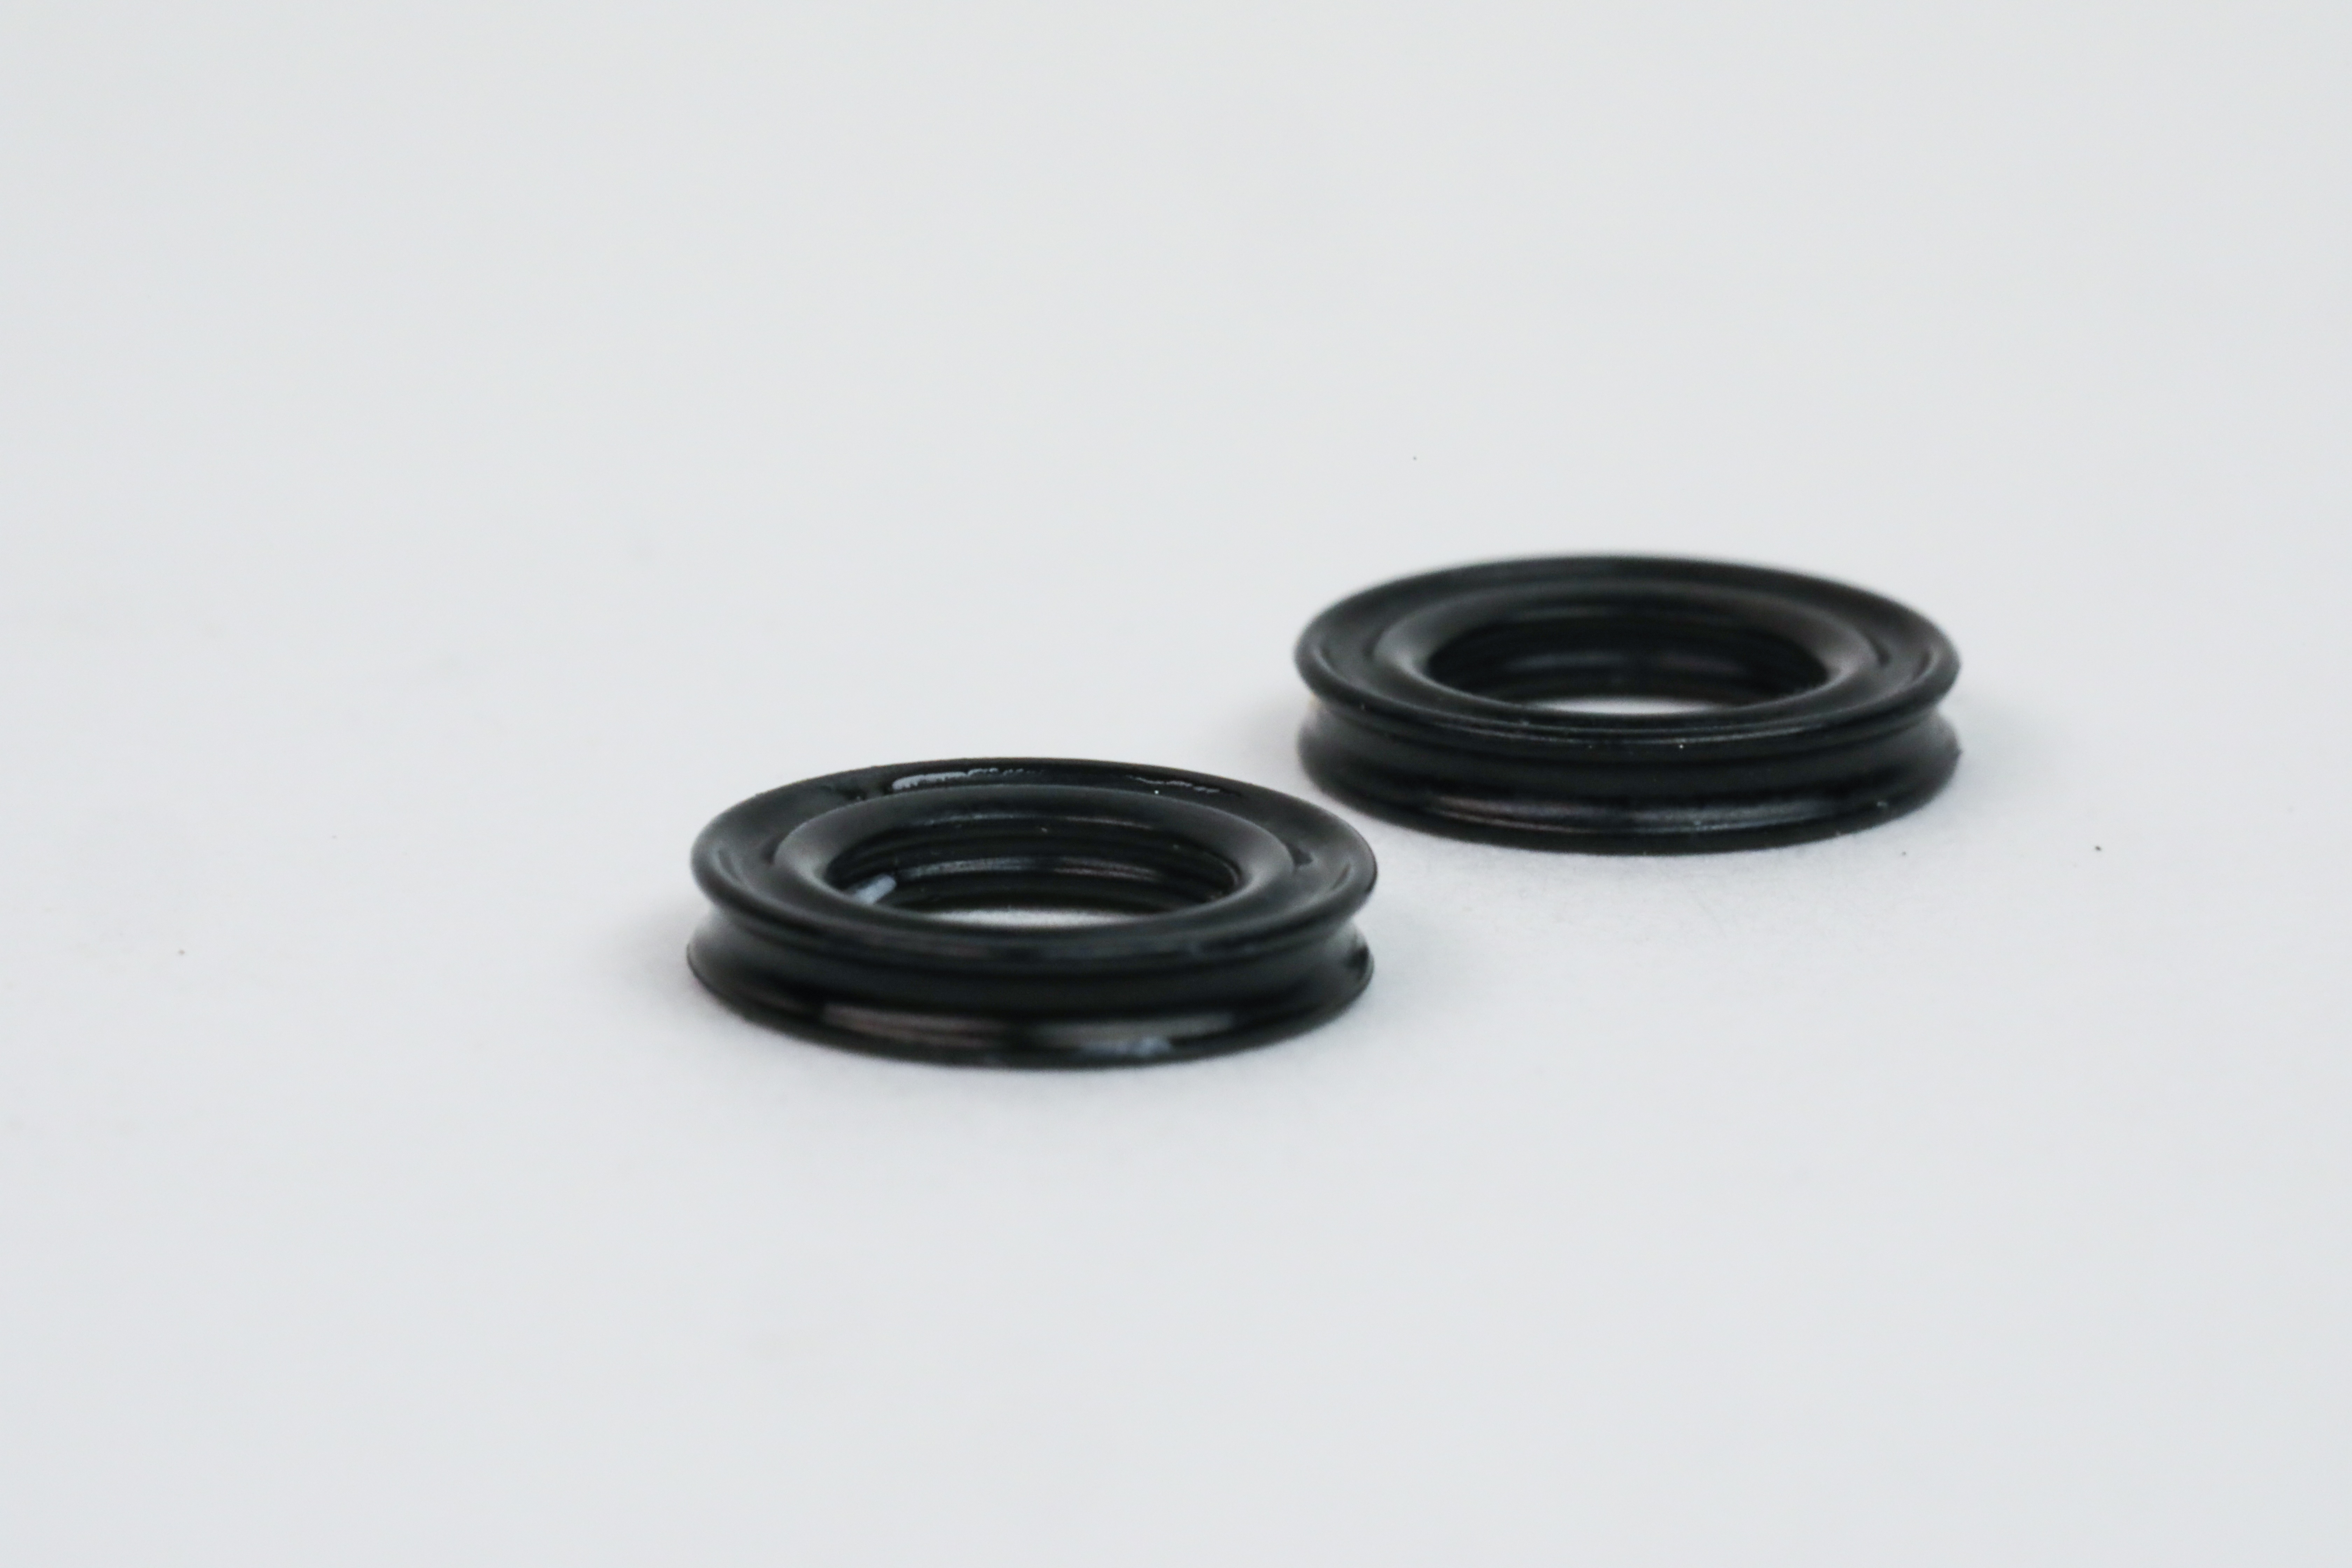 Waterproof Rubber Seal Washer for RP-SMA & SMA to Seal Connector on  Enclosure